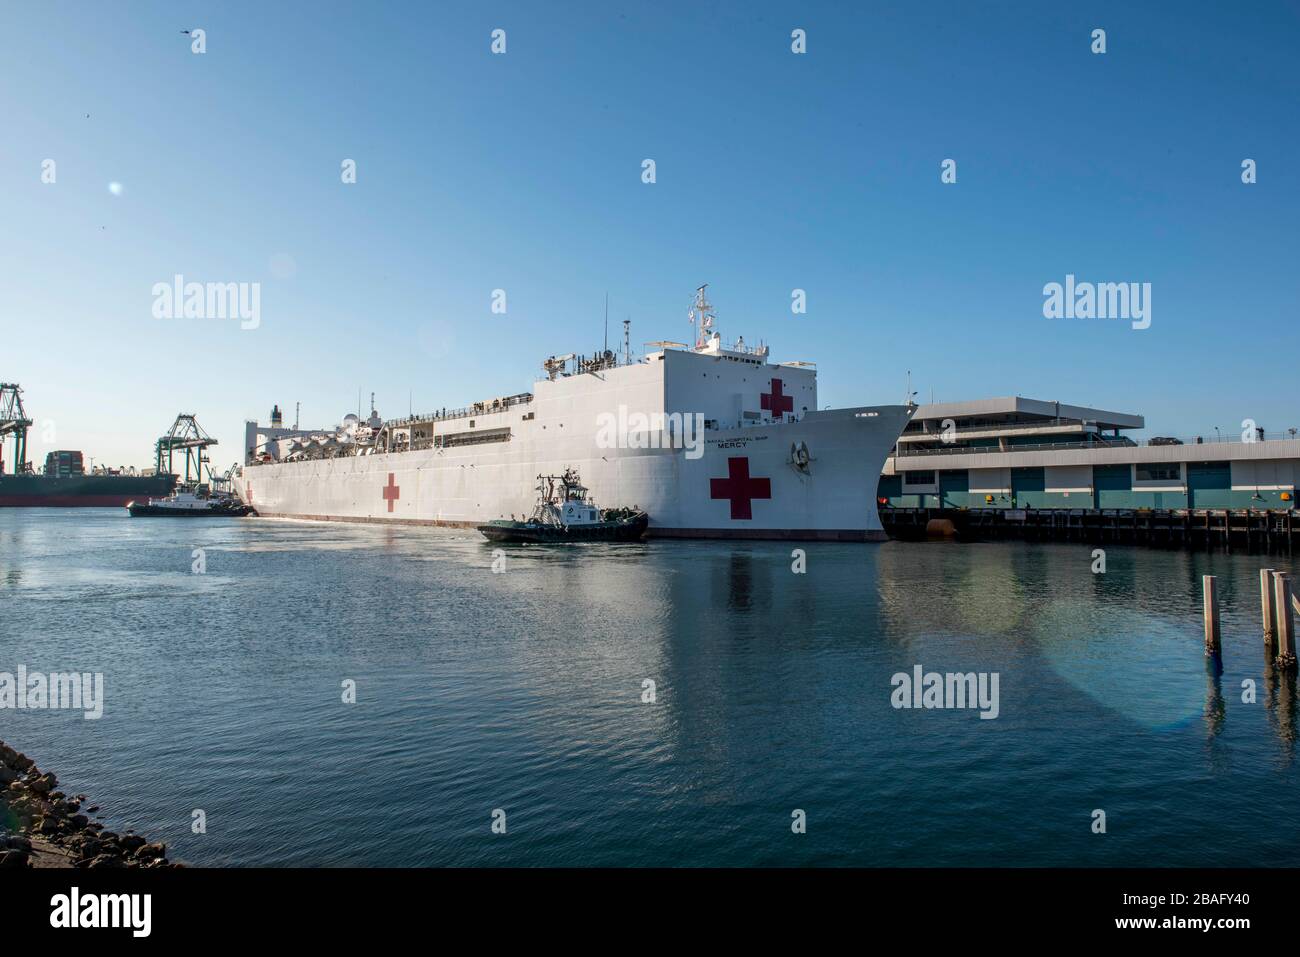 In this photo released by the United States Navy, the Military Sealift Command hospital ship USNS Mercy (T-AH 19) arrives in Los Angeles, California, March 27, 2020. Mercy deployed in support of the nation's COVID-19 response efforts, and will serve as a referral hospital for non-COVID-19 patients currently admitted to shore-based hospitals. This allows shore base hospitals to focus their efforts on COVID-19 cases. One of the Department of Defense's missions is Defense Support of Civil Authorities. DoD is supporting the Federal Emergency Management Agency, the lead federal agency, as well as s Stock Photo